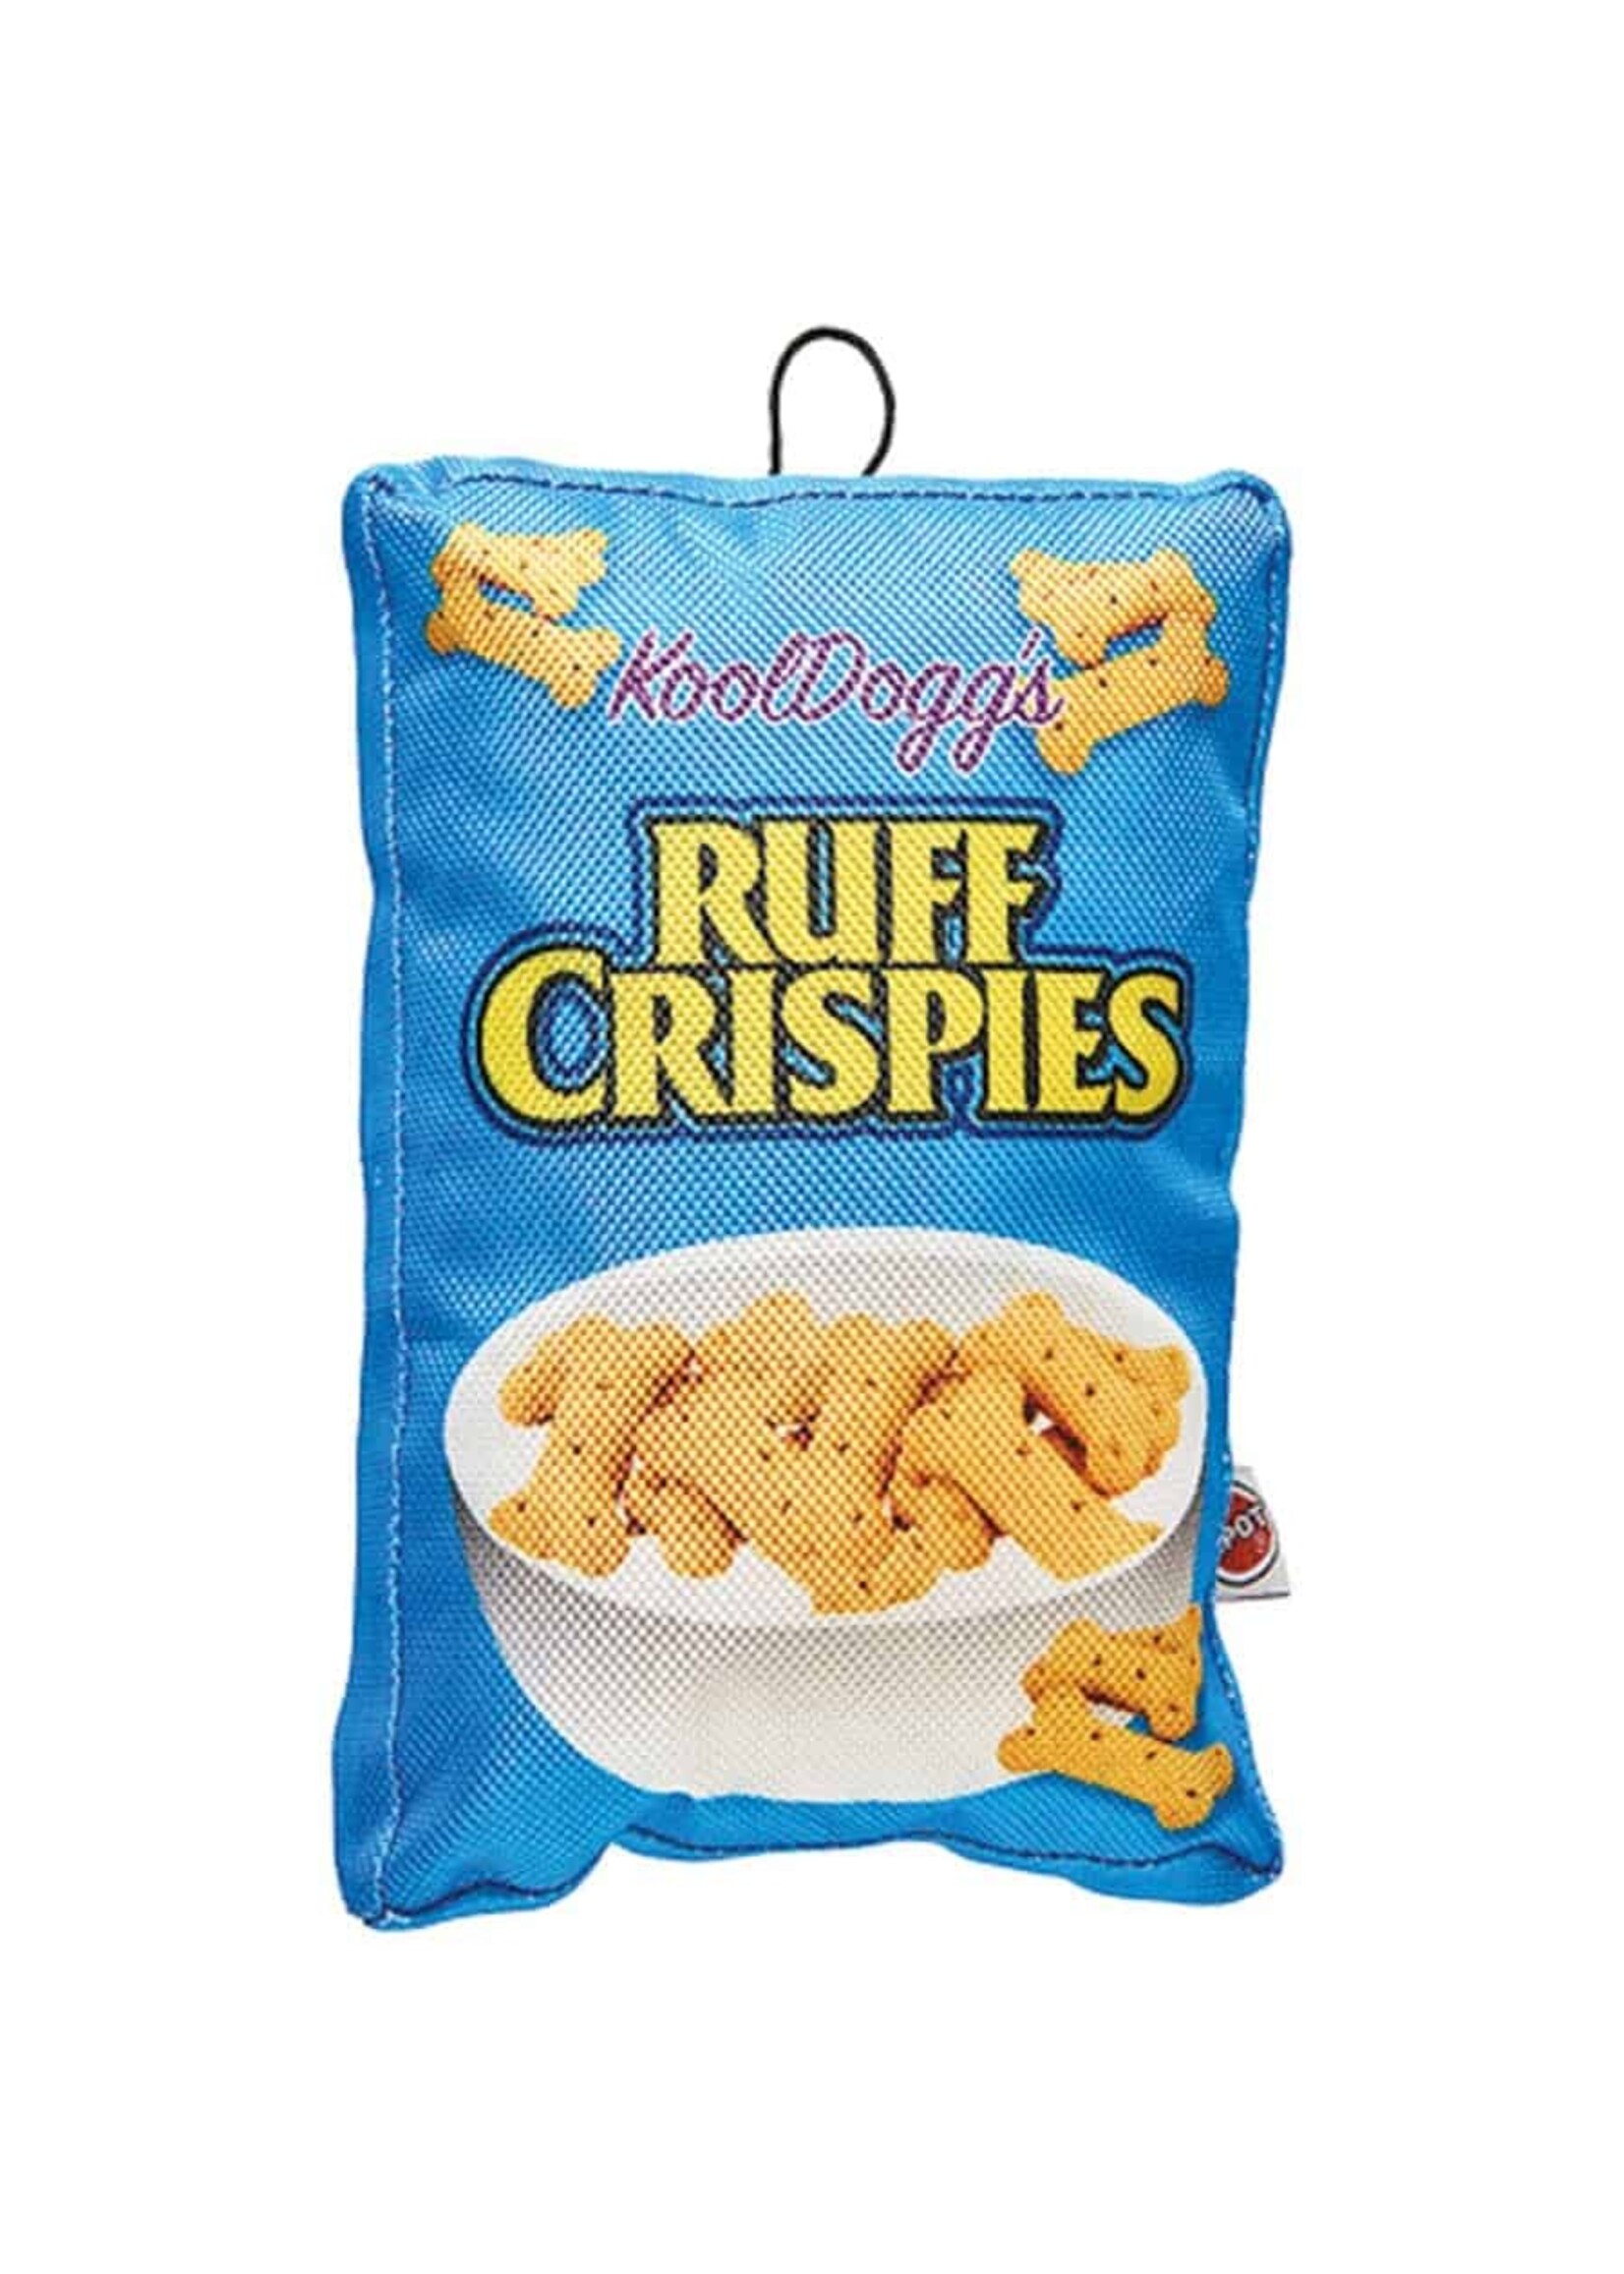 Ethical Ethical Fun Food Ruff Crispies